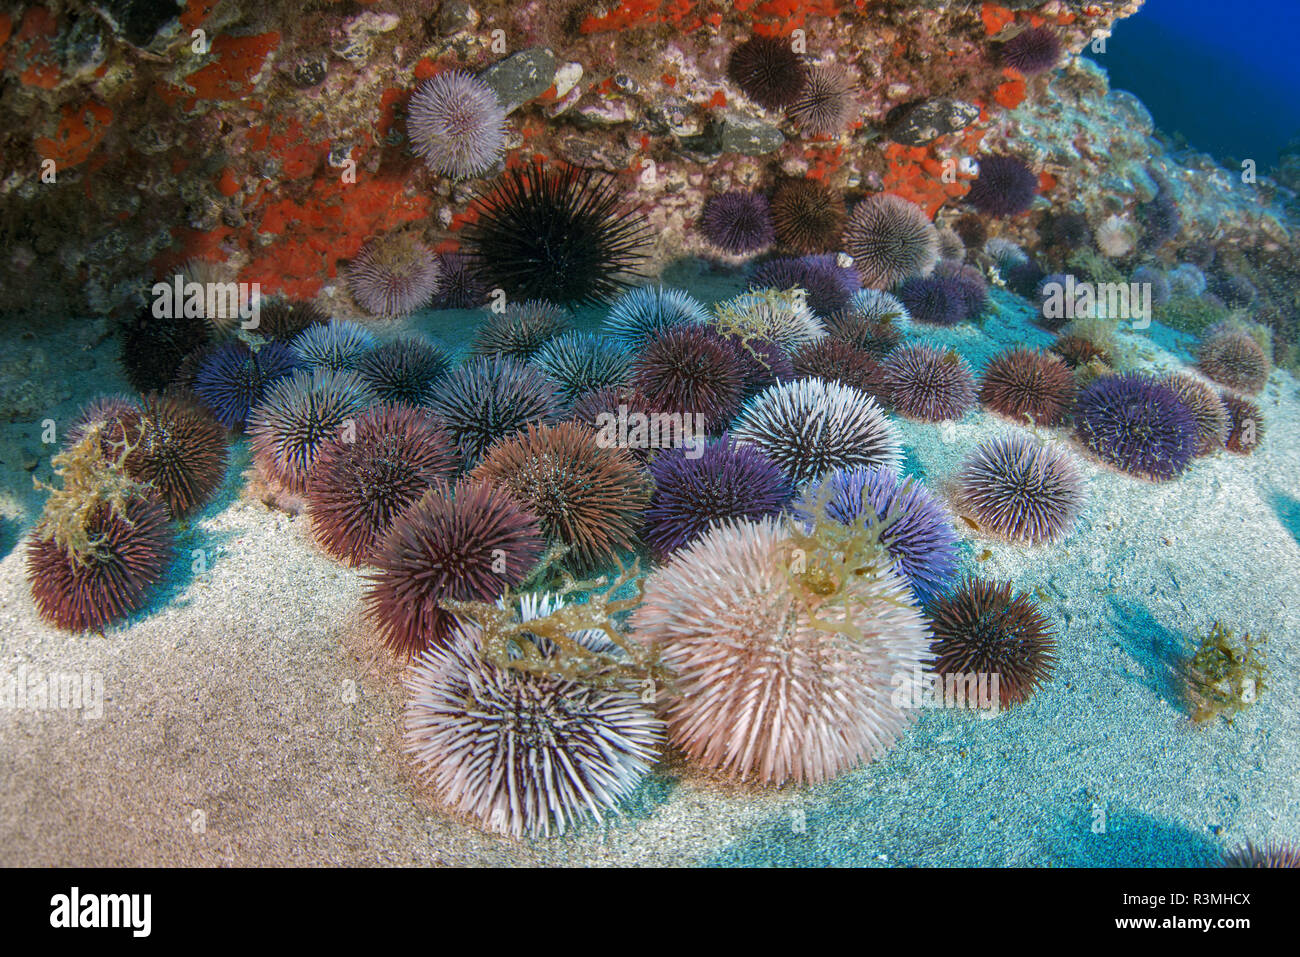 Purple sea urchin (Sphaerechinus granularis). Unusual concentration, probably related to the reproduction cycle, Tenerife, Canary Islands. Stock Photo